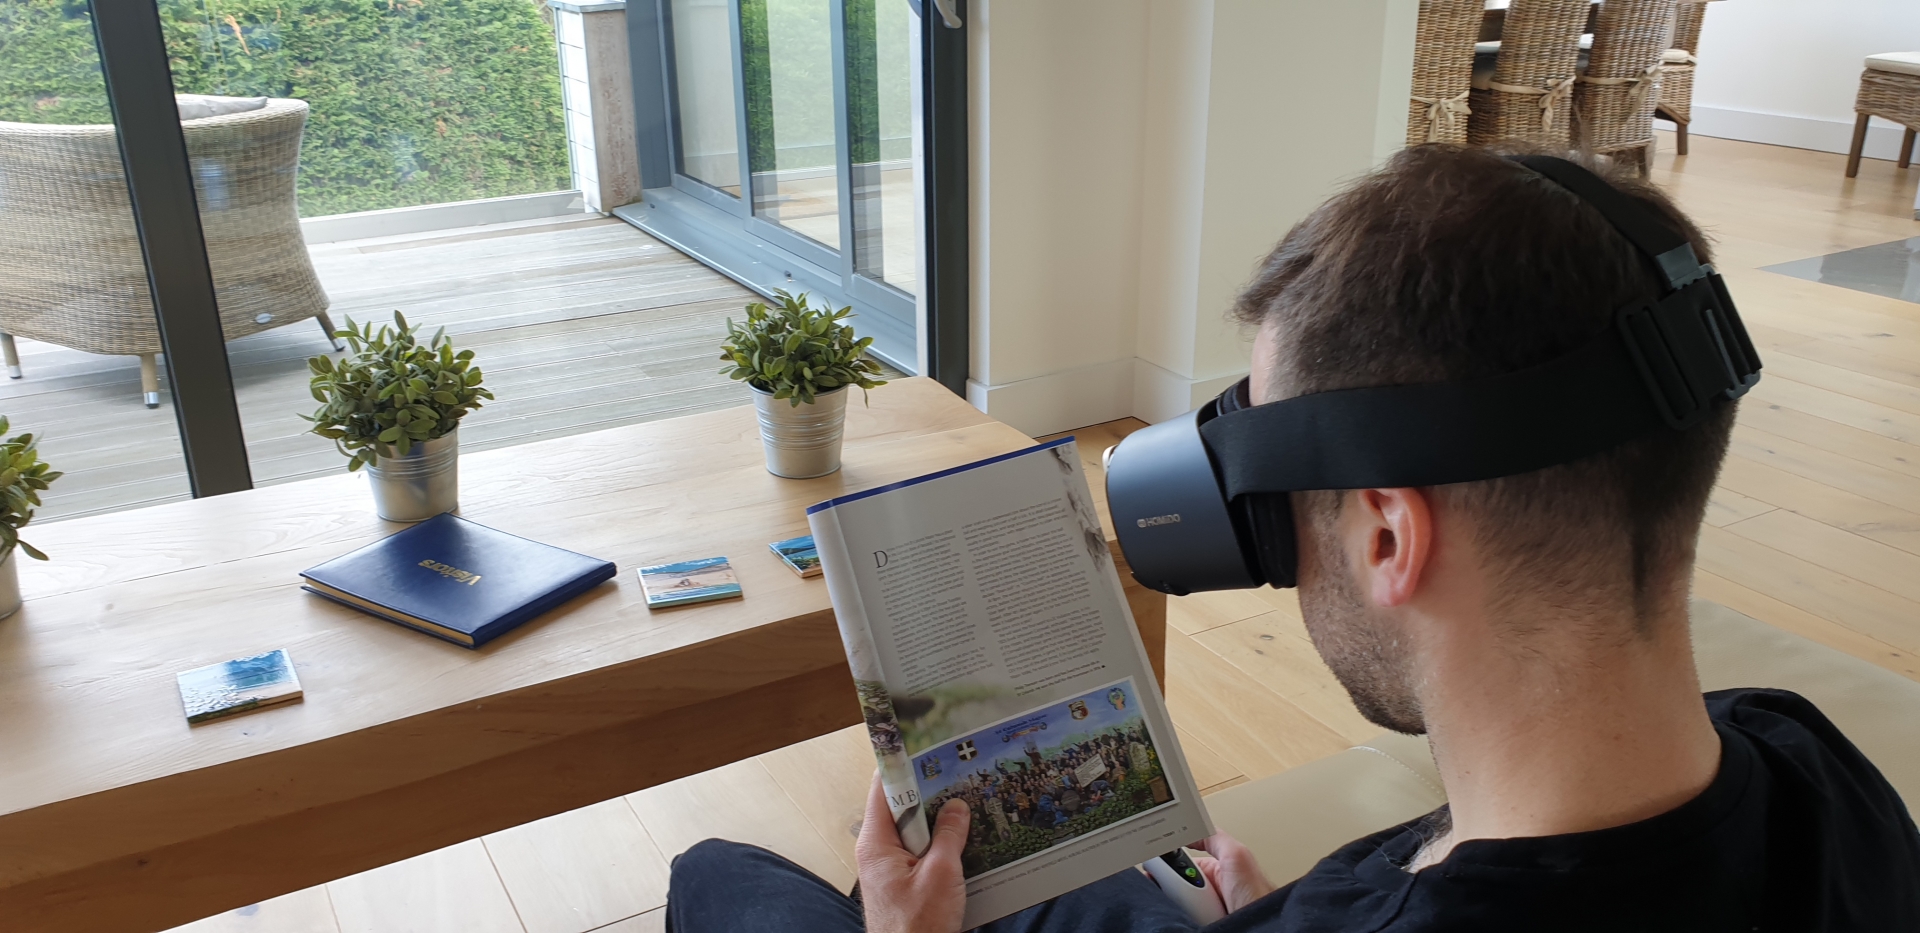 The SightPlus device is designed to help with a range of day-to-day tasks, including reading, which is often very difficult, if not impossible, for people with degenerative eye conditions.